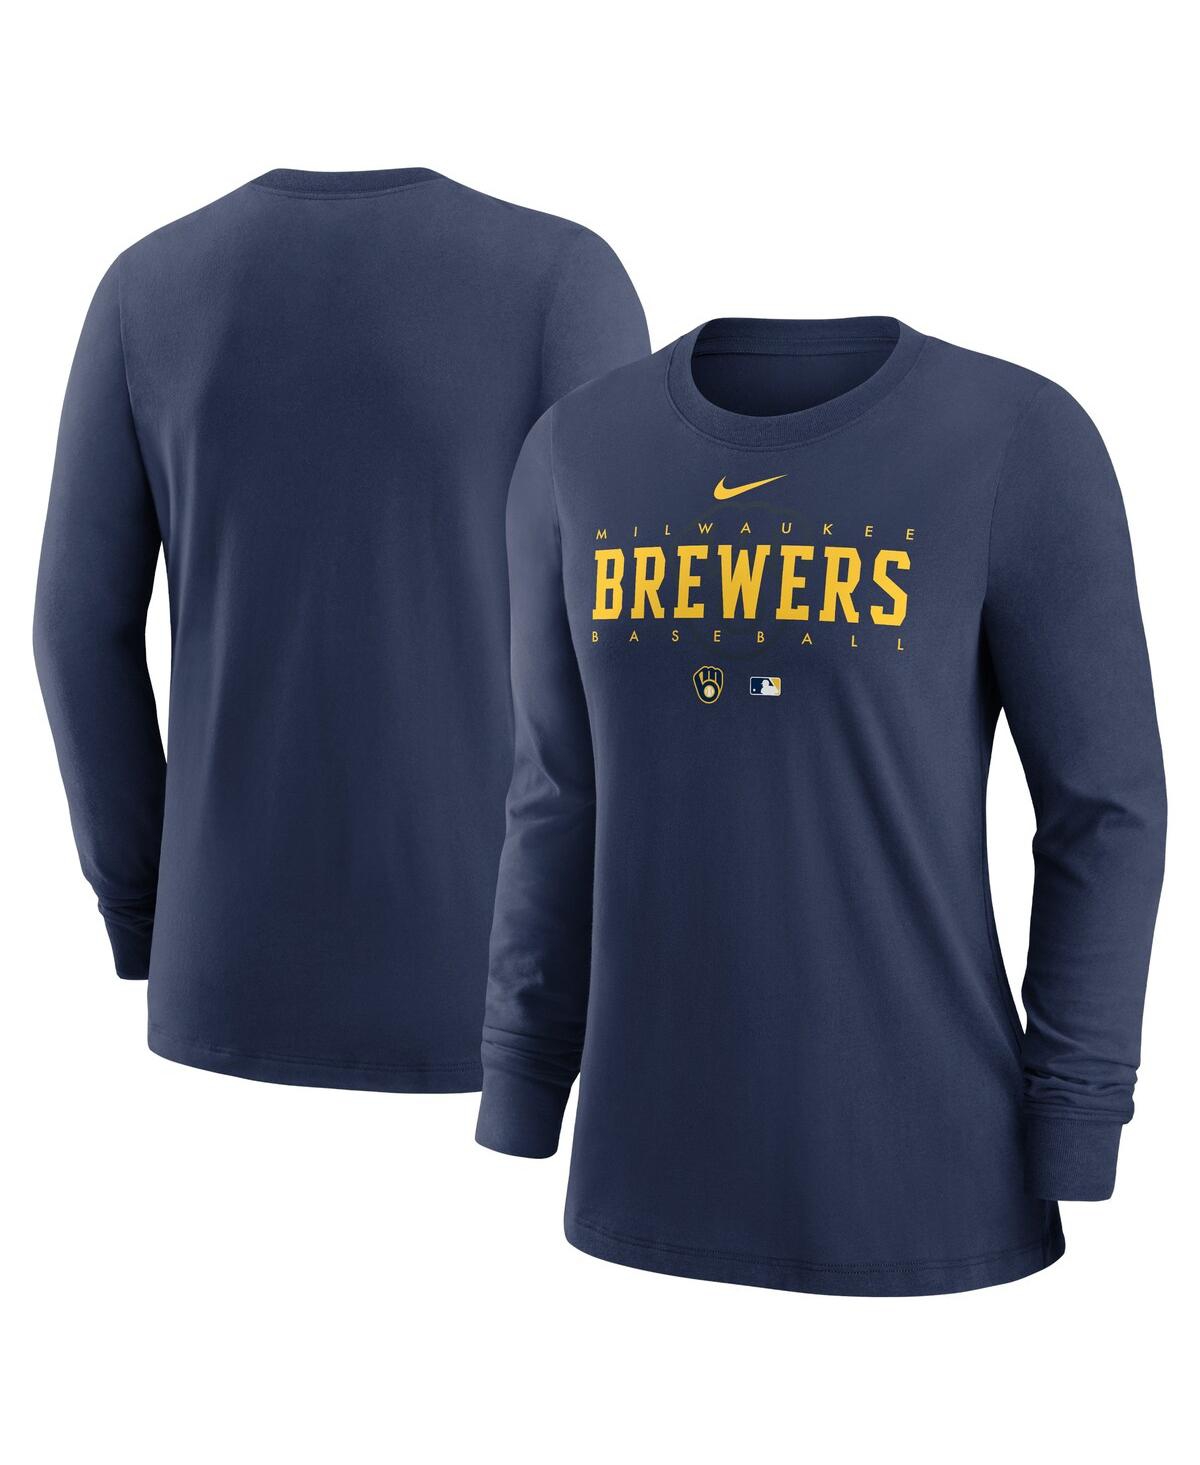 Shop Nike Women's  Navy Milwaukee Brewers Authentic Collection Legend Performance Long Sleeve T-shirt